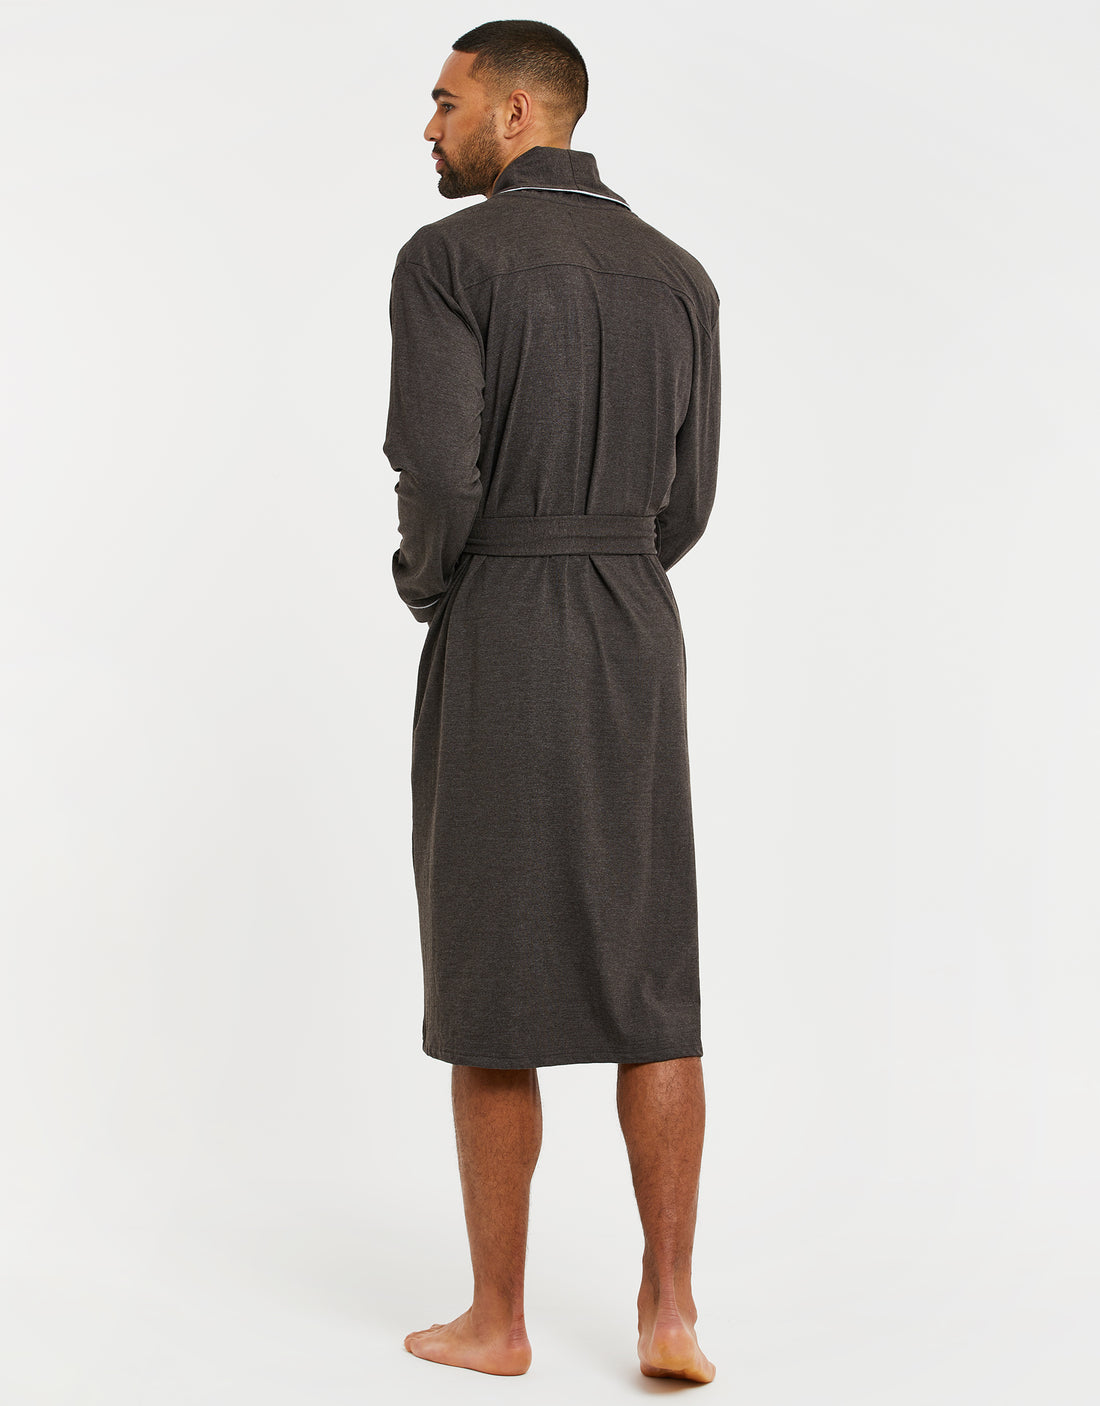 Men's Lightweight Dressing Gown Pacific By Bown of London |  notonthehighstreet.com